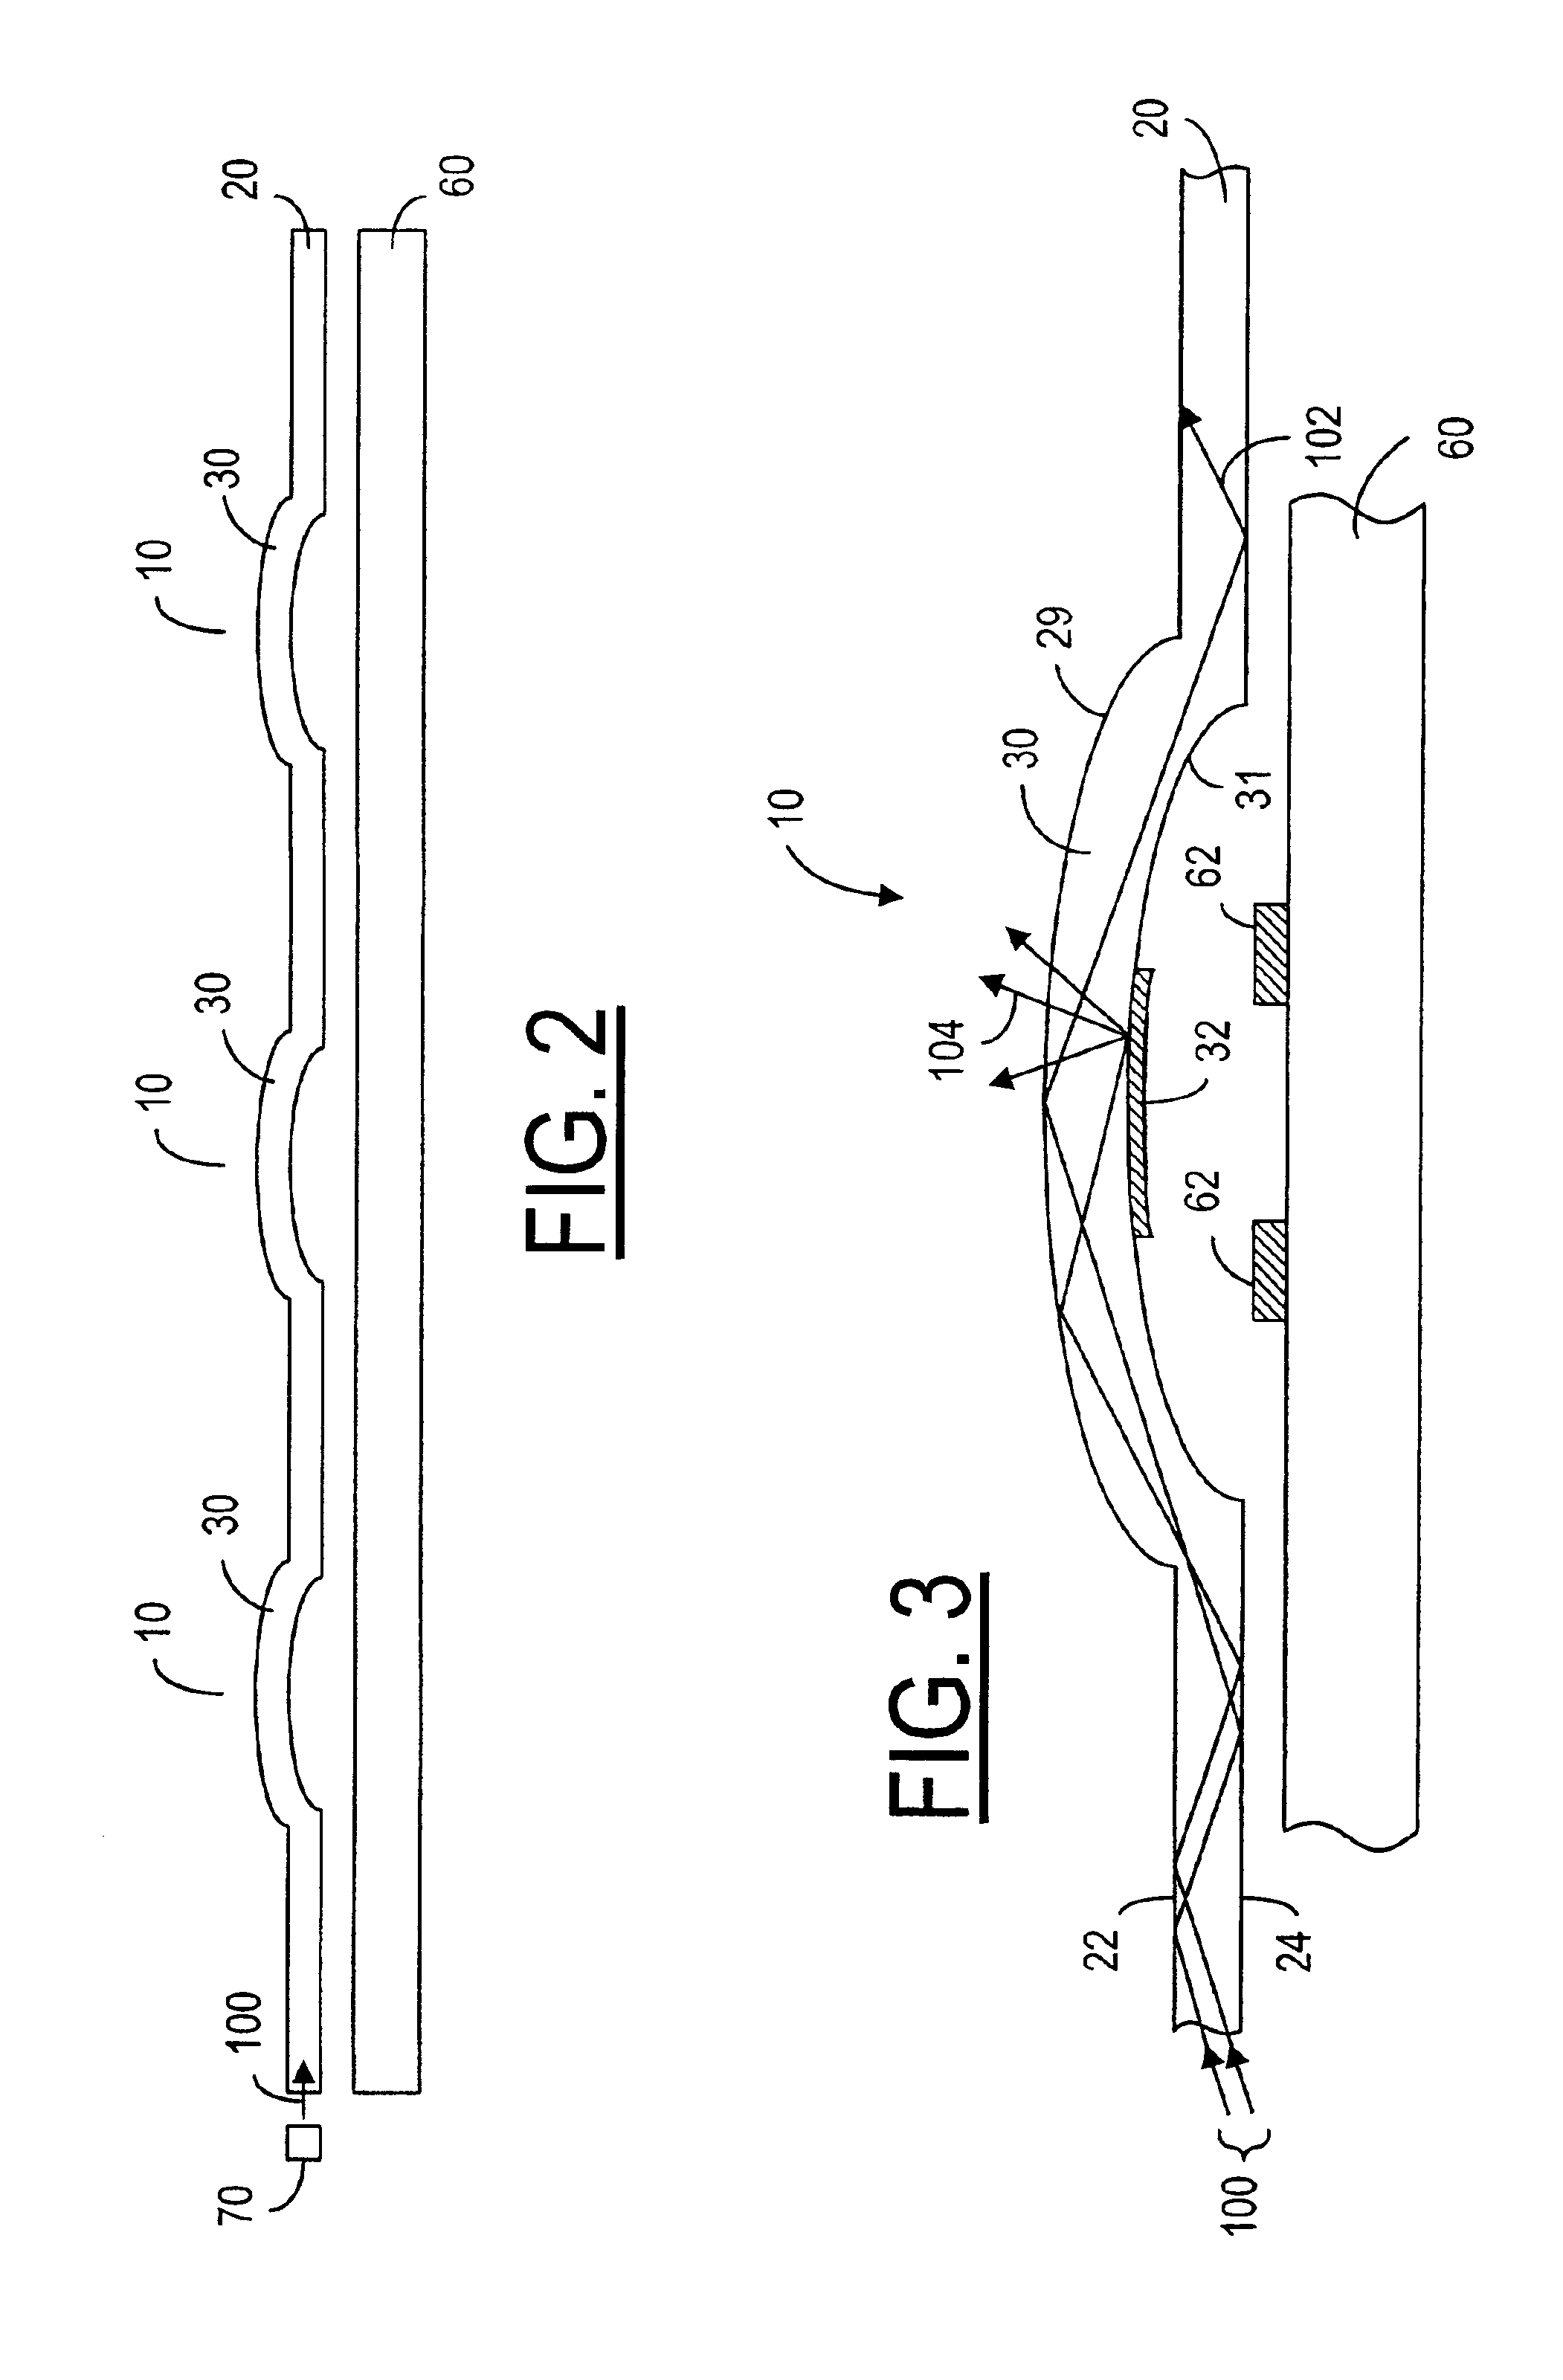 Integrated light-guide and dome-sheet for keyboard illumination